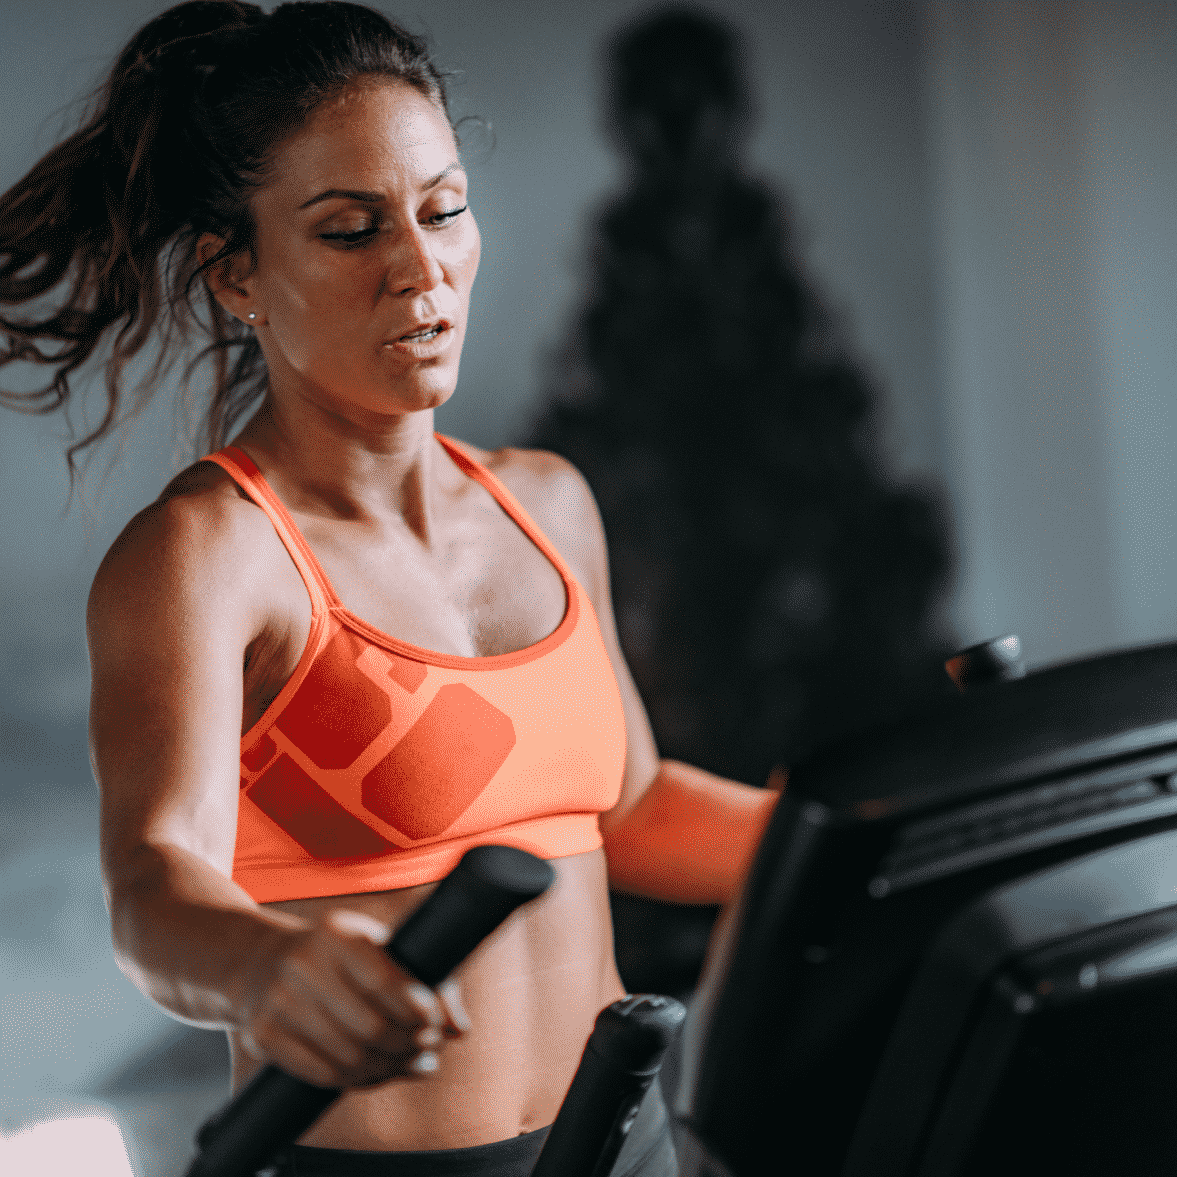 Elliptical Exercises For Weight Loss (3 Free Plans)